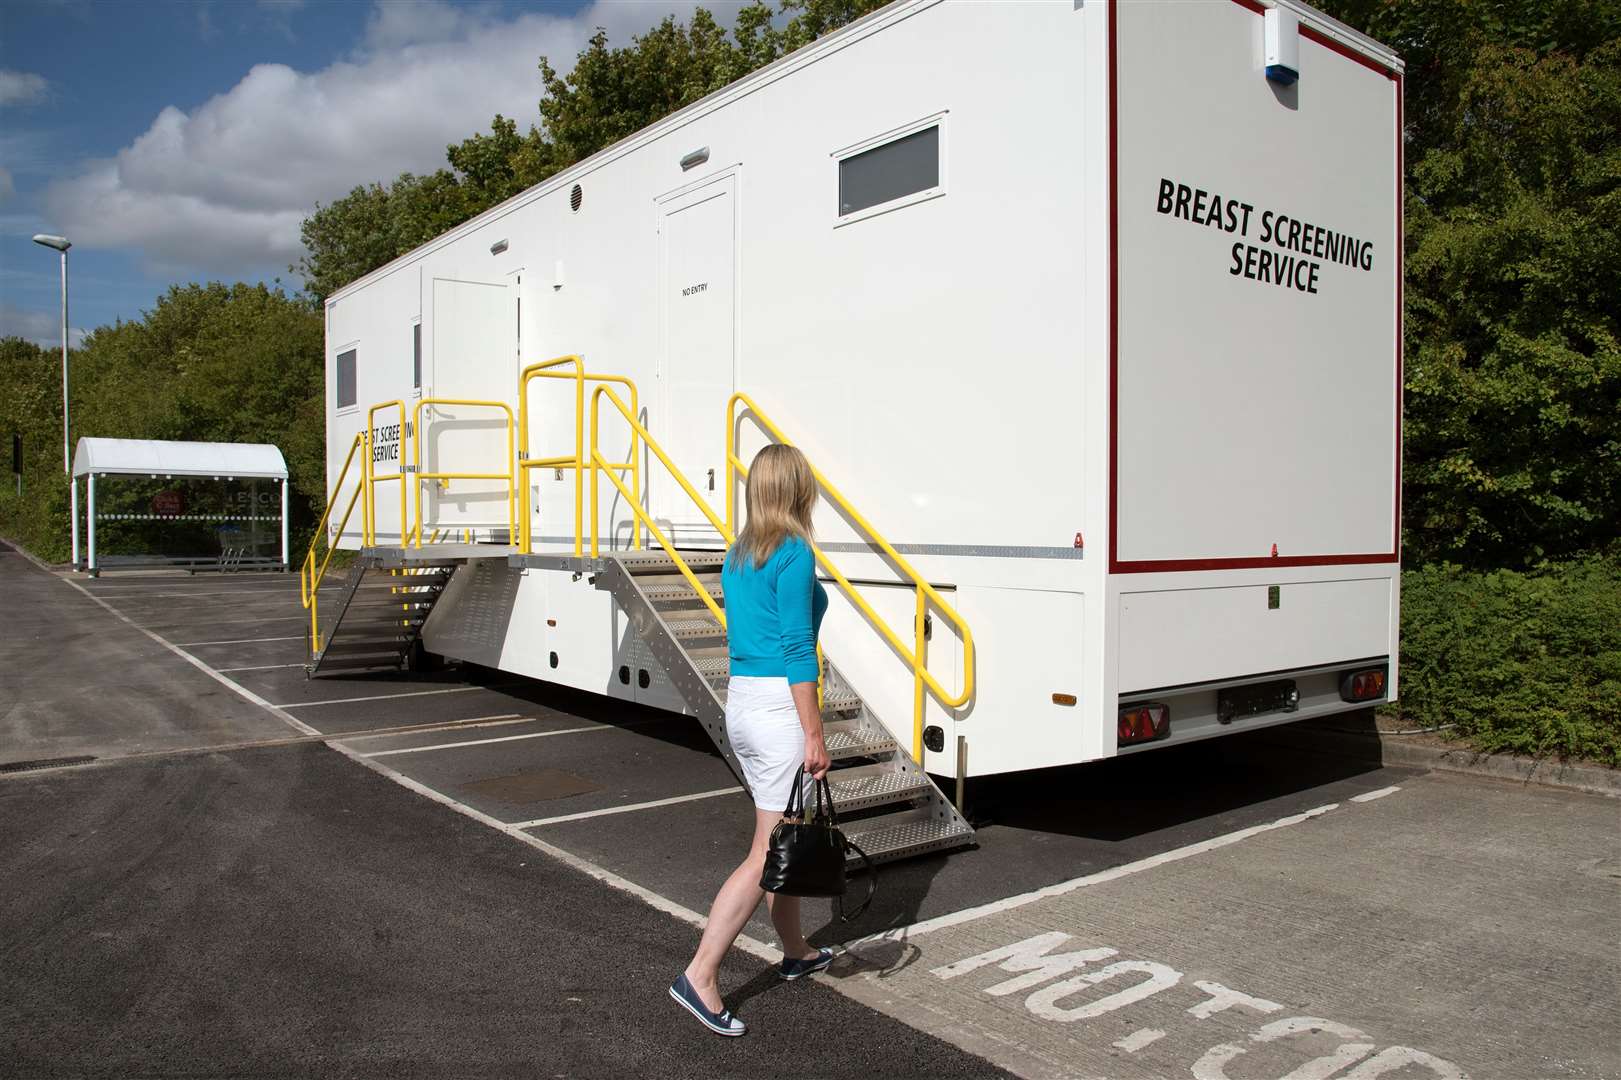 Mobile units similar to those used for breast cancer screening could be used for rural areas, says MSP Edward Mountain.